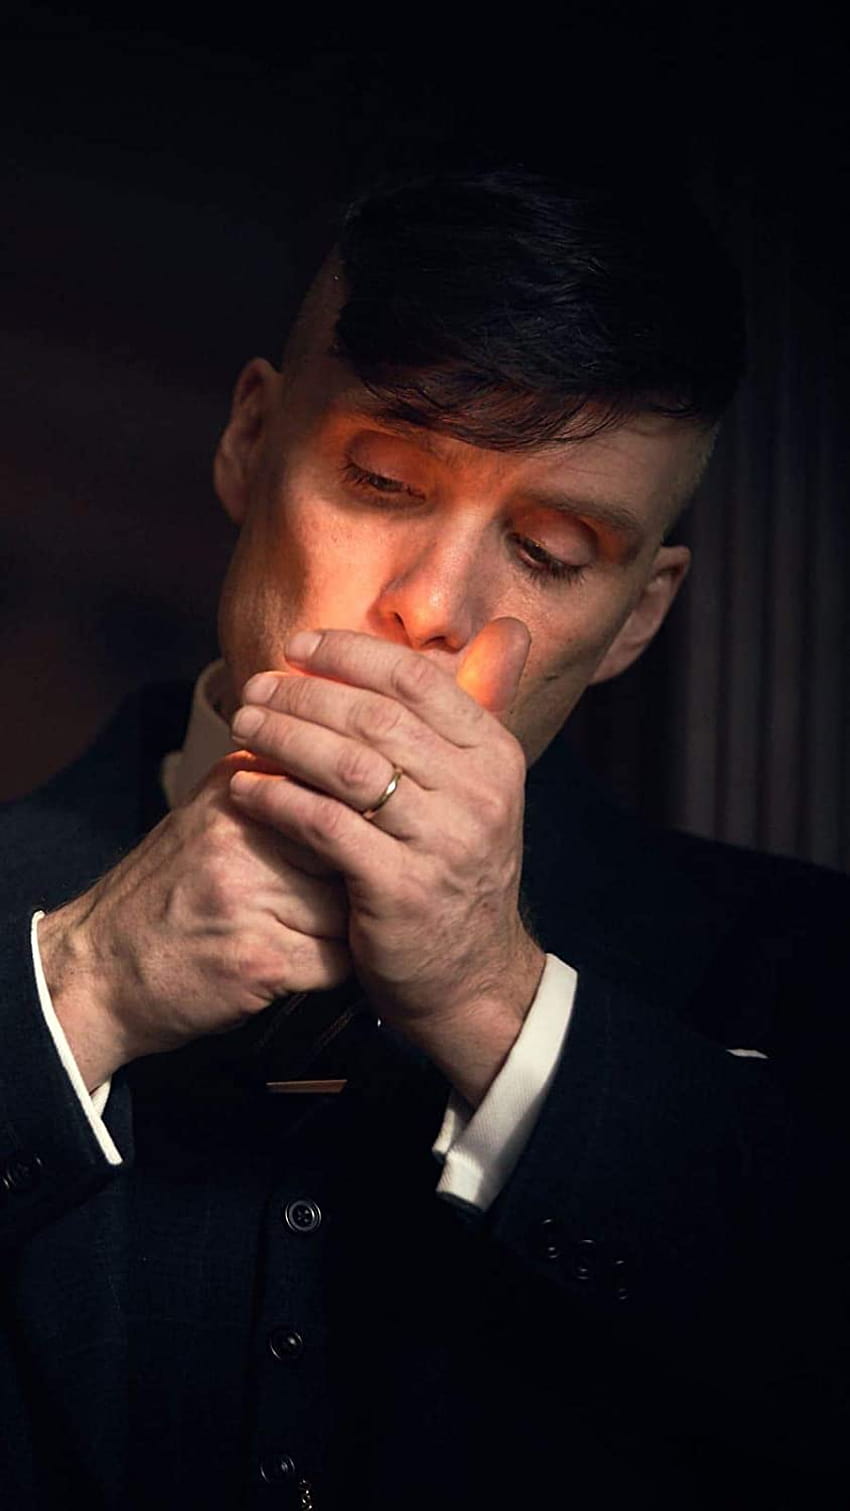 Peaky Blinders Poster Wall Decor Wall Print Tommy Shelby Wall Accessories  Home Decor: Handmade, tommy shelby smoking HD phone wallpaper | Pxfuel